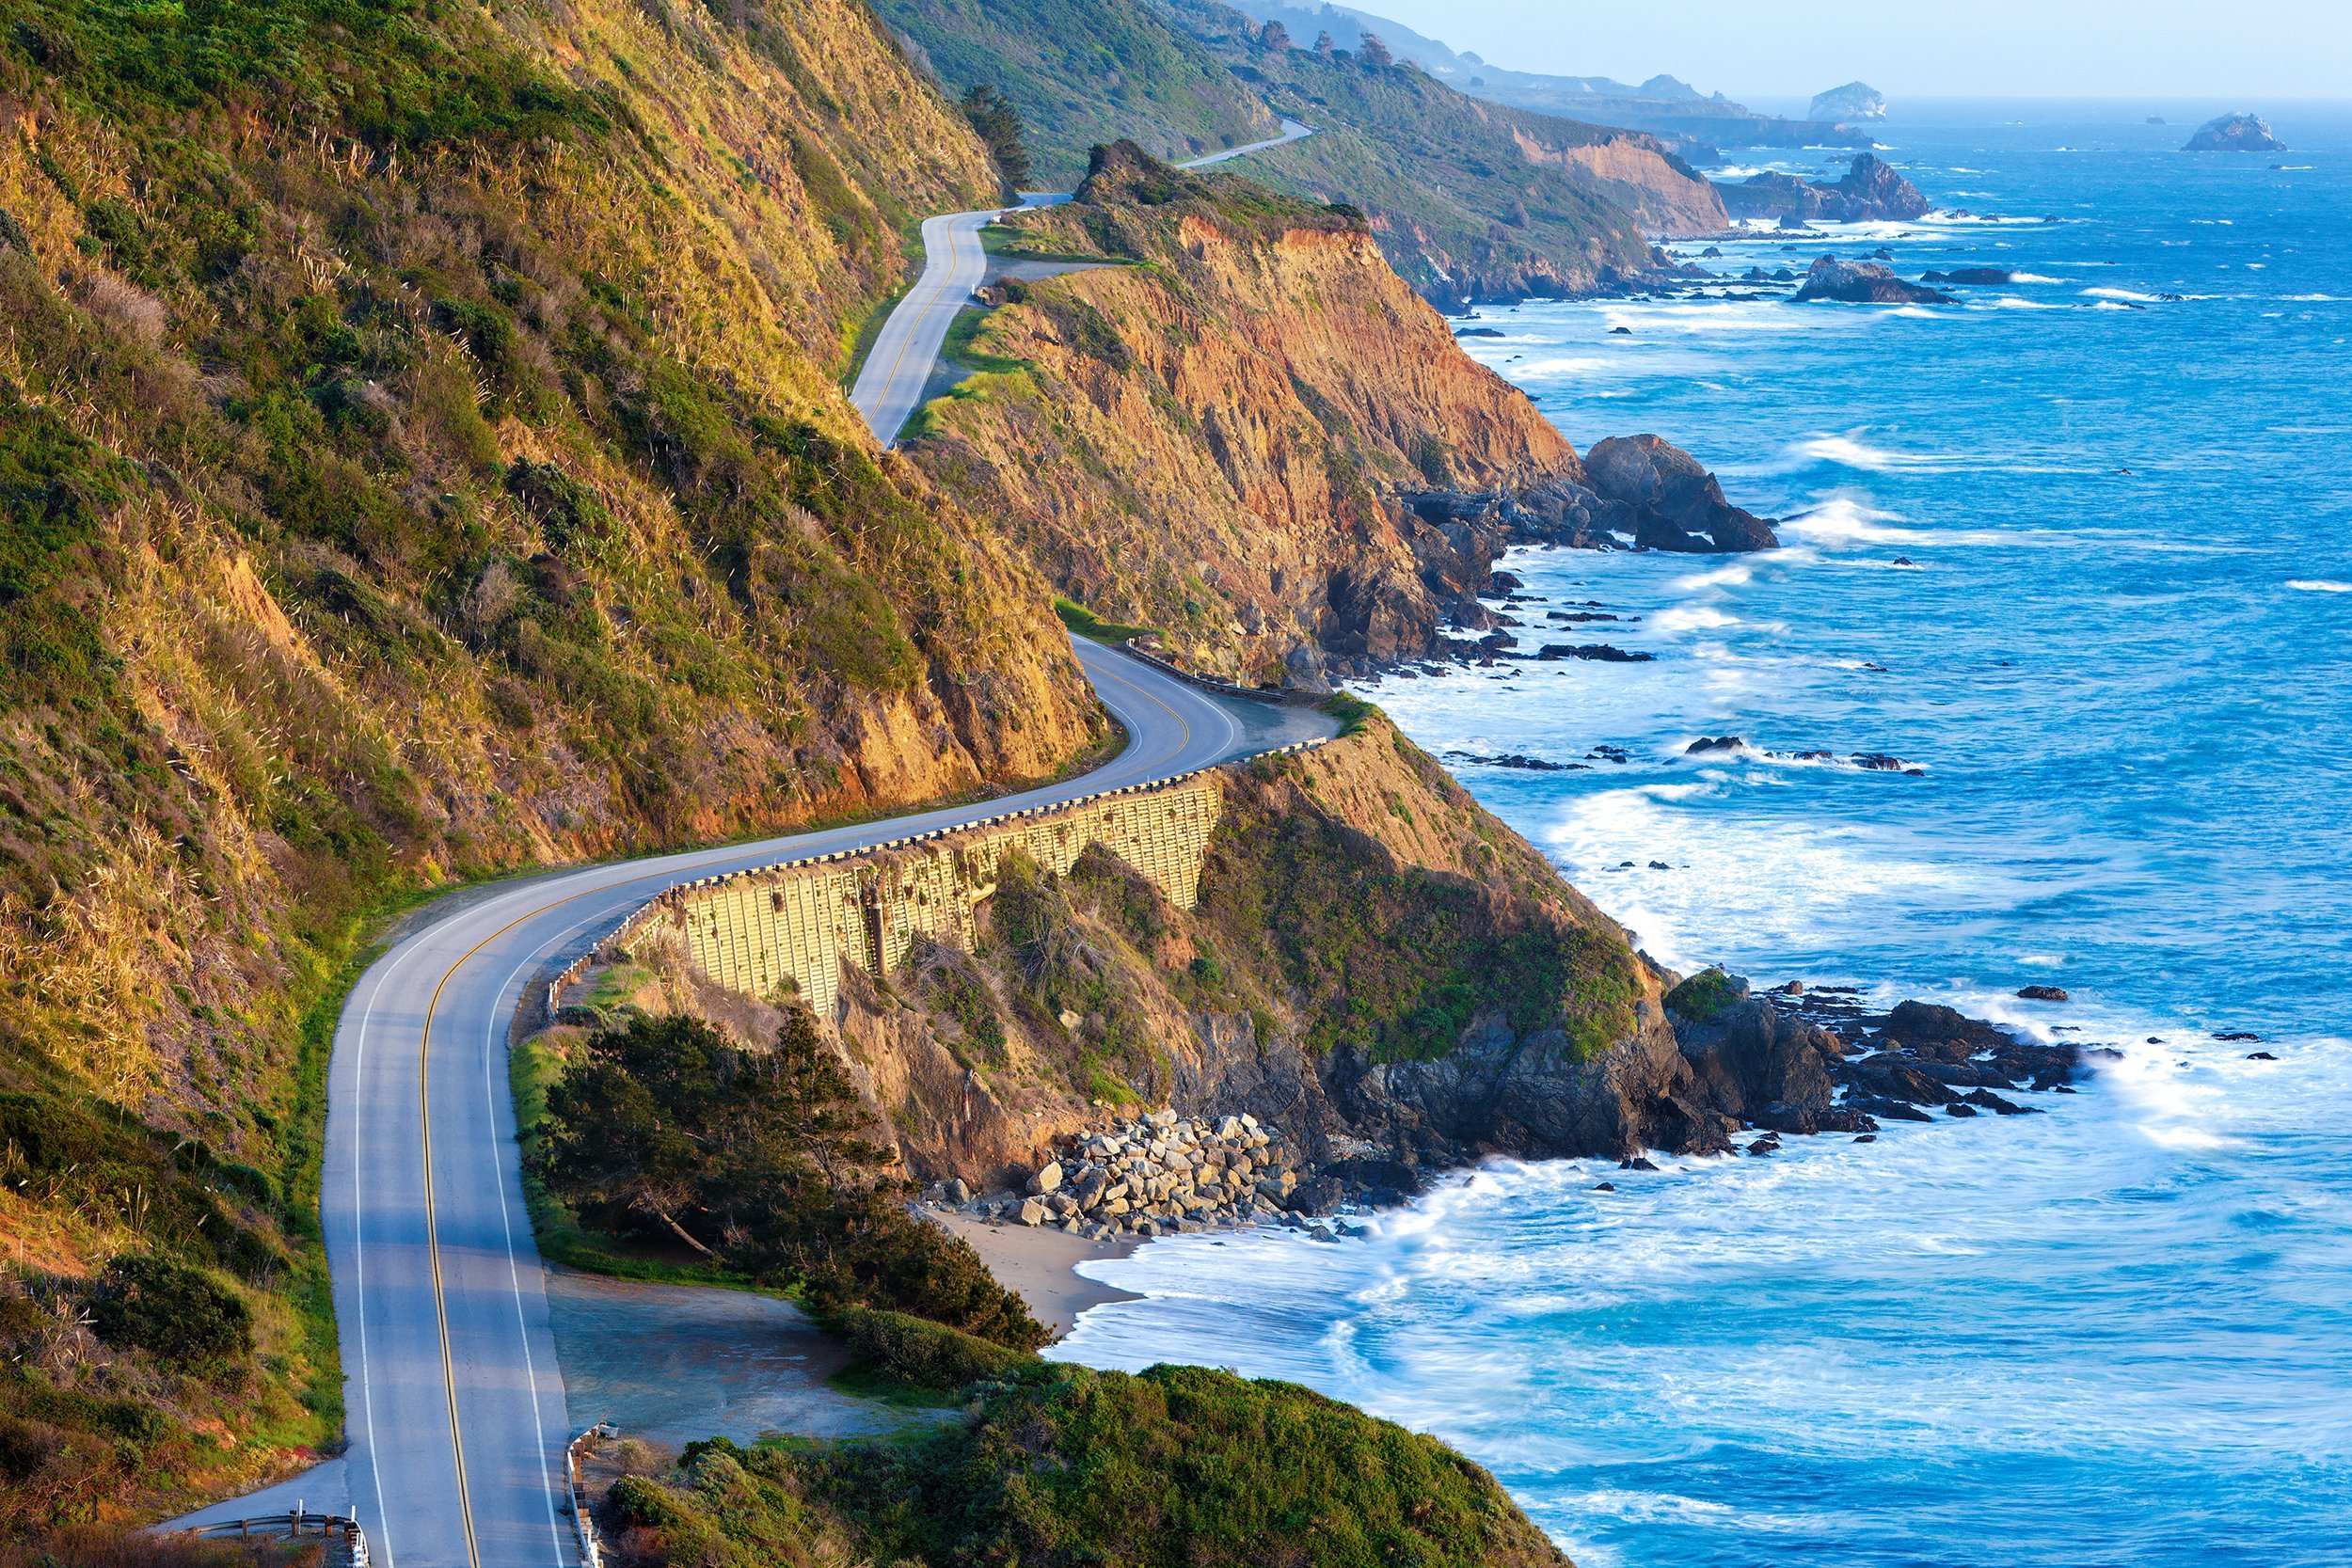 <p>A  scenic road trip can be an excellent, budget-friendly way to <a href="https://blog.cheapism.com/best-road-trip-ideas-15243/">explore stretches of the U.S.</a> you've never seen before. From San Francisco to San Diego, California's <a href="https://www.visittheusa.com/trip/pacific-coast-highway-road-trip">Pacific Coast Highway</a> — or California Highway 1 — provides a glimpse of some of America's most dramatic coastal vistas. Take in bay views and the Golden Gate Bridge in San Francisco before heading south to San Diego — winding slowly through surf towns with fresh seafood, state parks touting a range of outdoor activities, the rugged coastal mountains and cliffs of Big Sur (between San Simeon and Carmel), vineyards, <a href="https://blog.cheapism.com/tourist-traps-locals-love-17149/">kitschy roadside attractions</a>, and more.&nbsp;</p><p><b>Related:&nbsp;</b><a href="https://blog.cheapism.com/best-of-california-on-a-budget-15768/">The Best of California For Budget Vacations</a> </p>